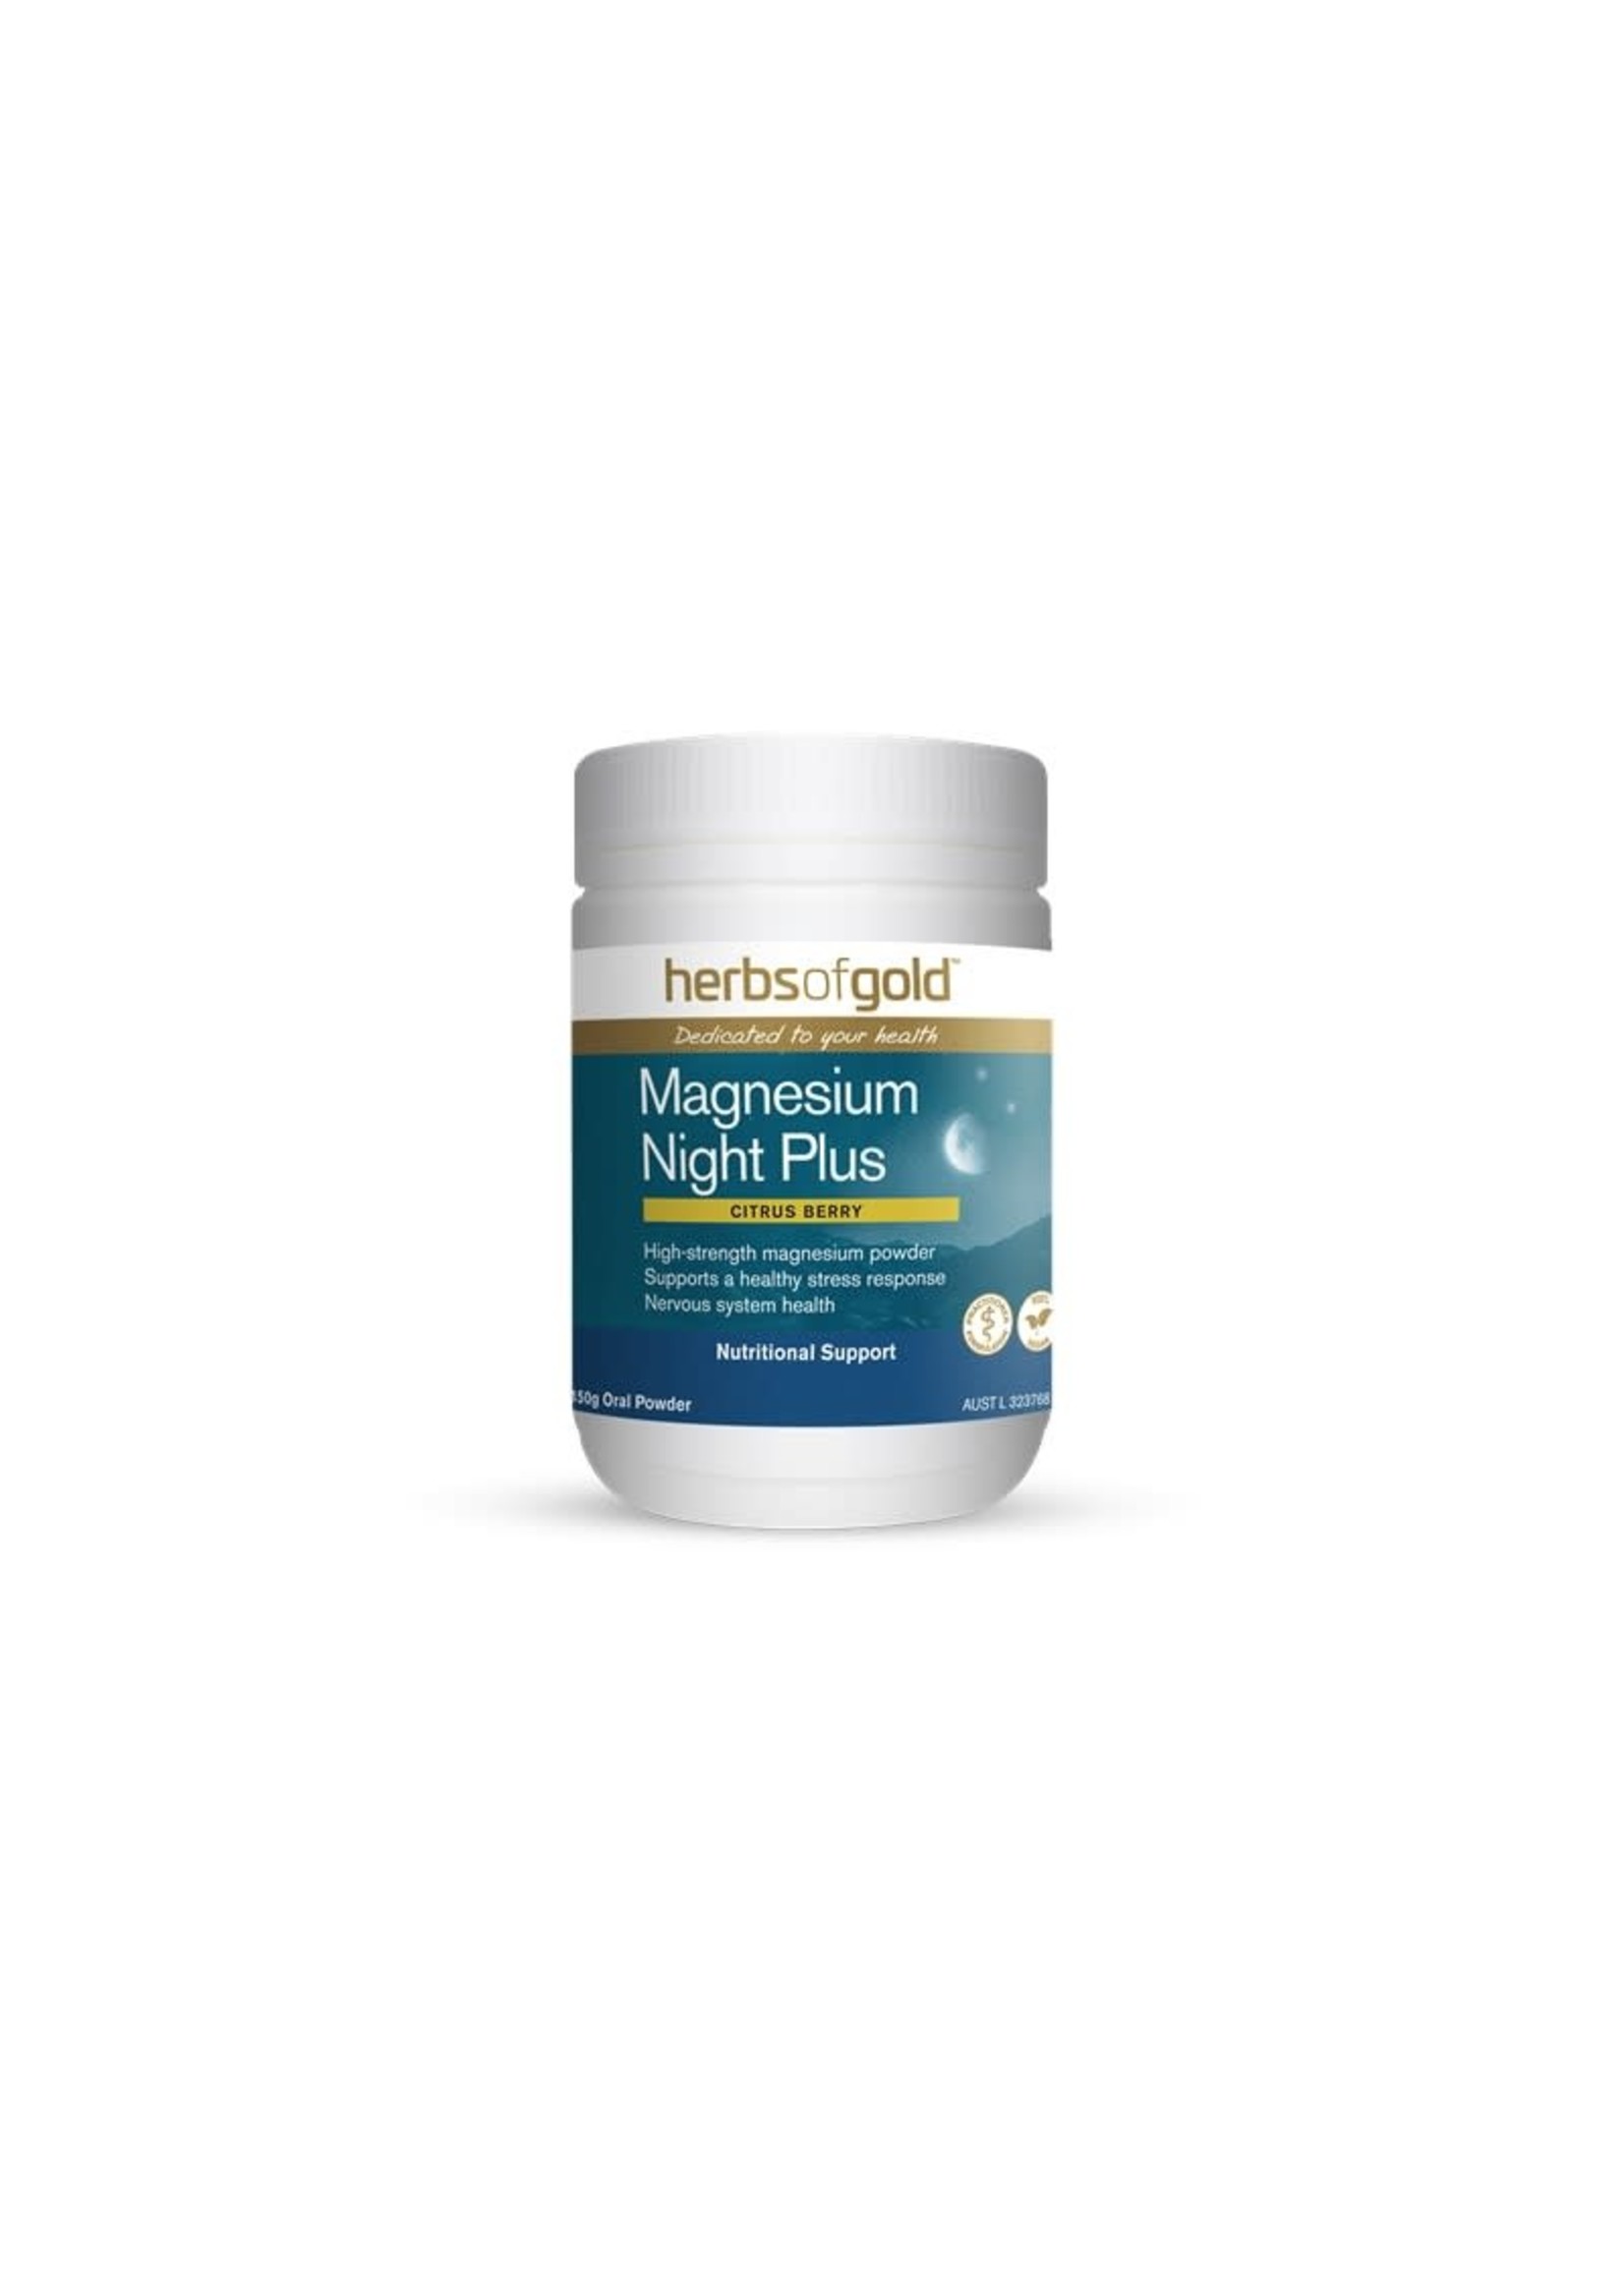 Herbs of Gold Herbs of Gold Magnesium Night Plus 150g